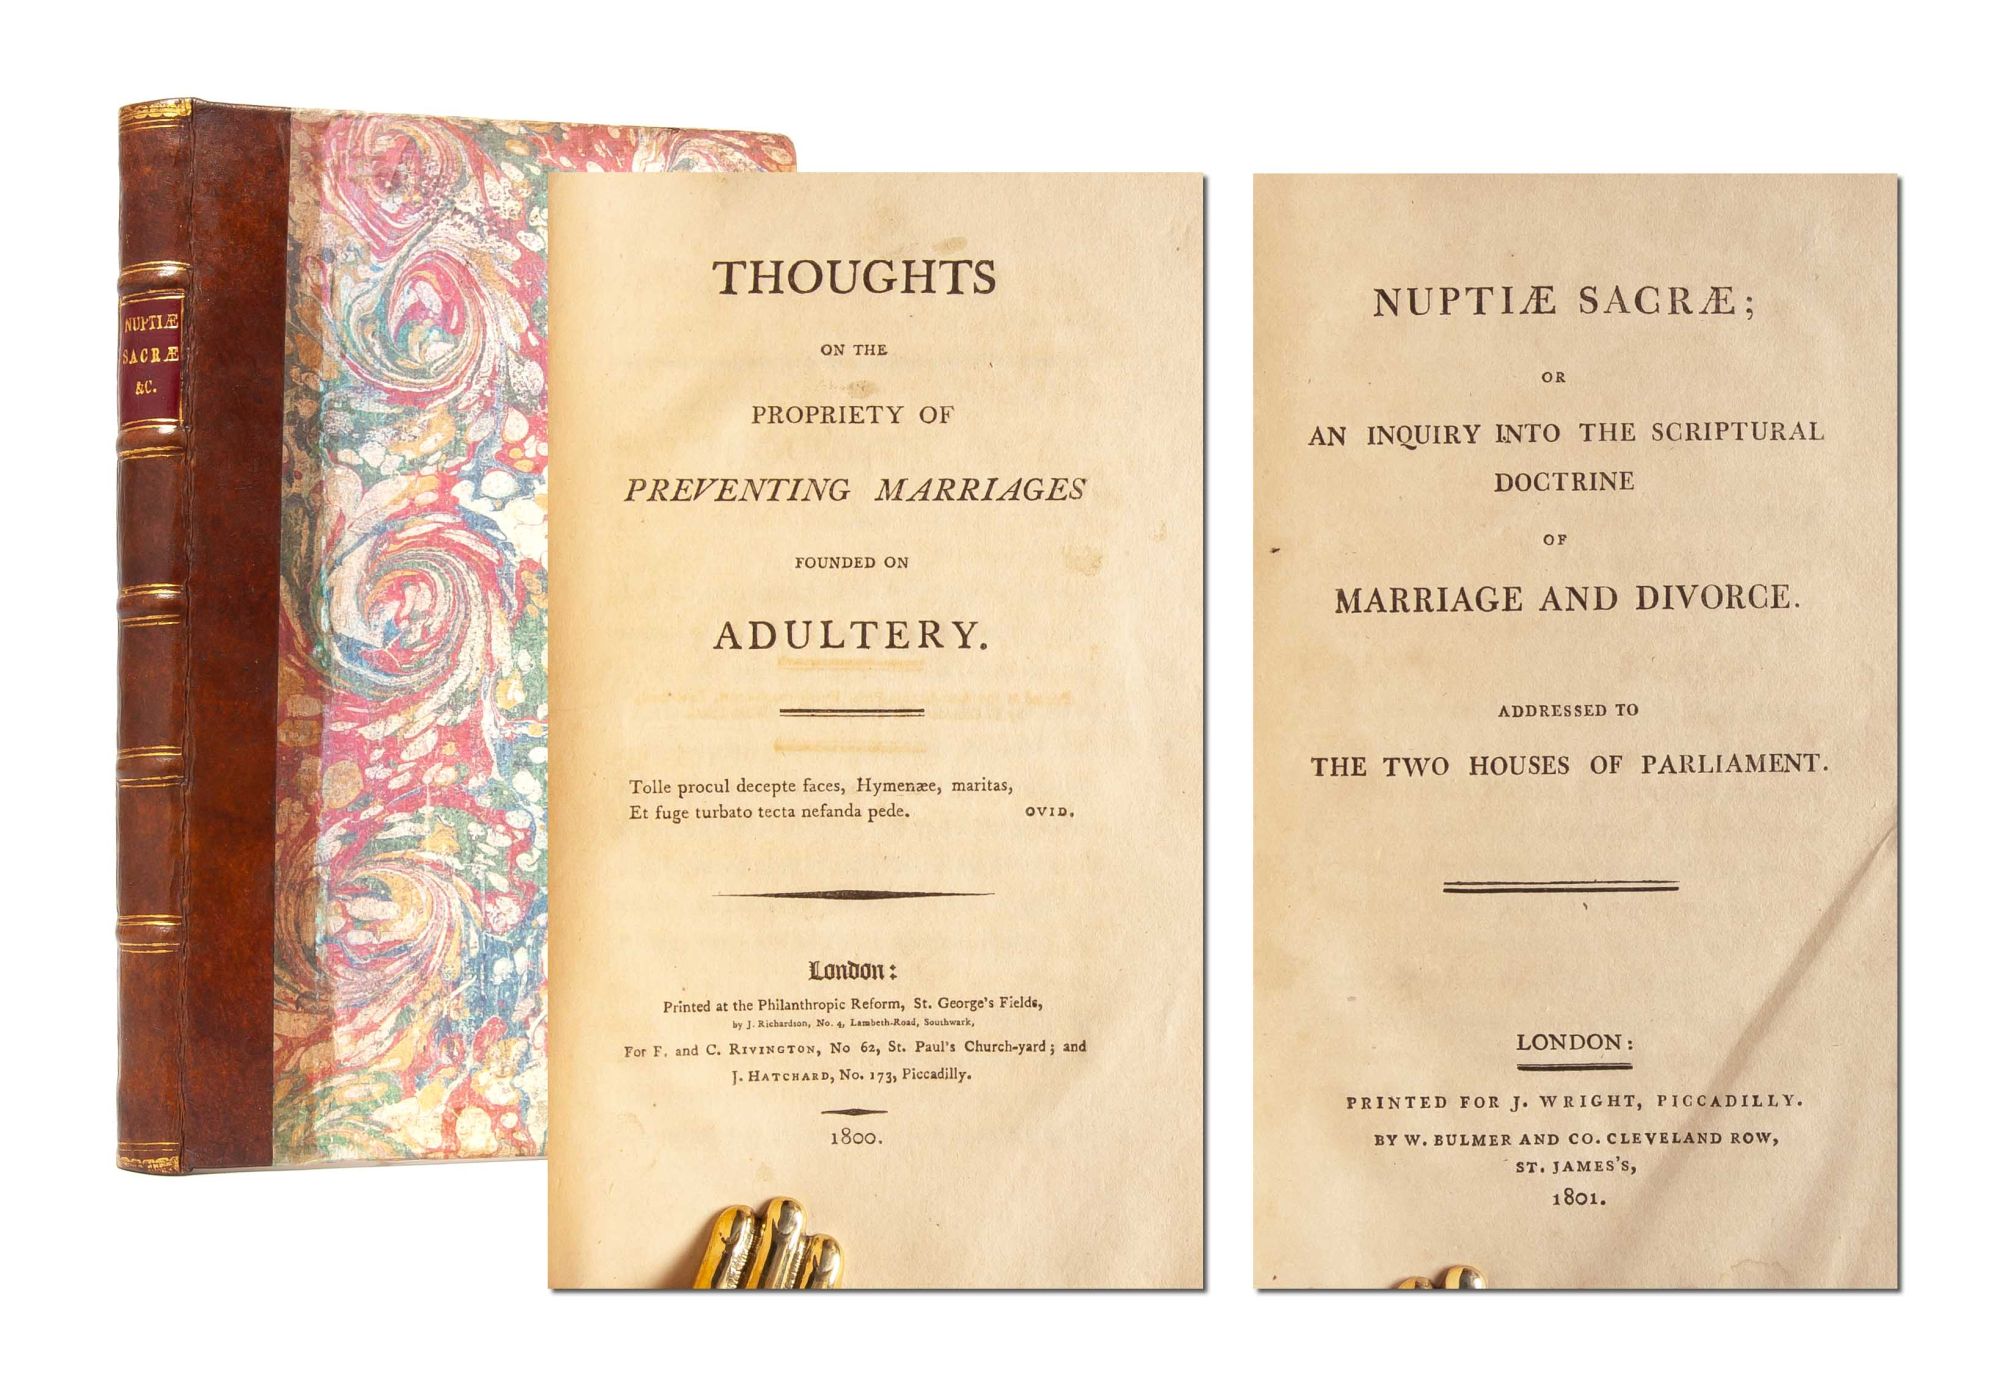 (Item #5554) Nuptiae Sacra; or an Inquiry into the Scriptural Doctine of Marriage and Divorce [with] Thoughts on the Propriety of Preventing Marriages Founded on Adultery. Women's Rights, Marriage, Divorce.